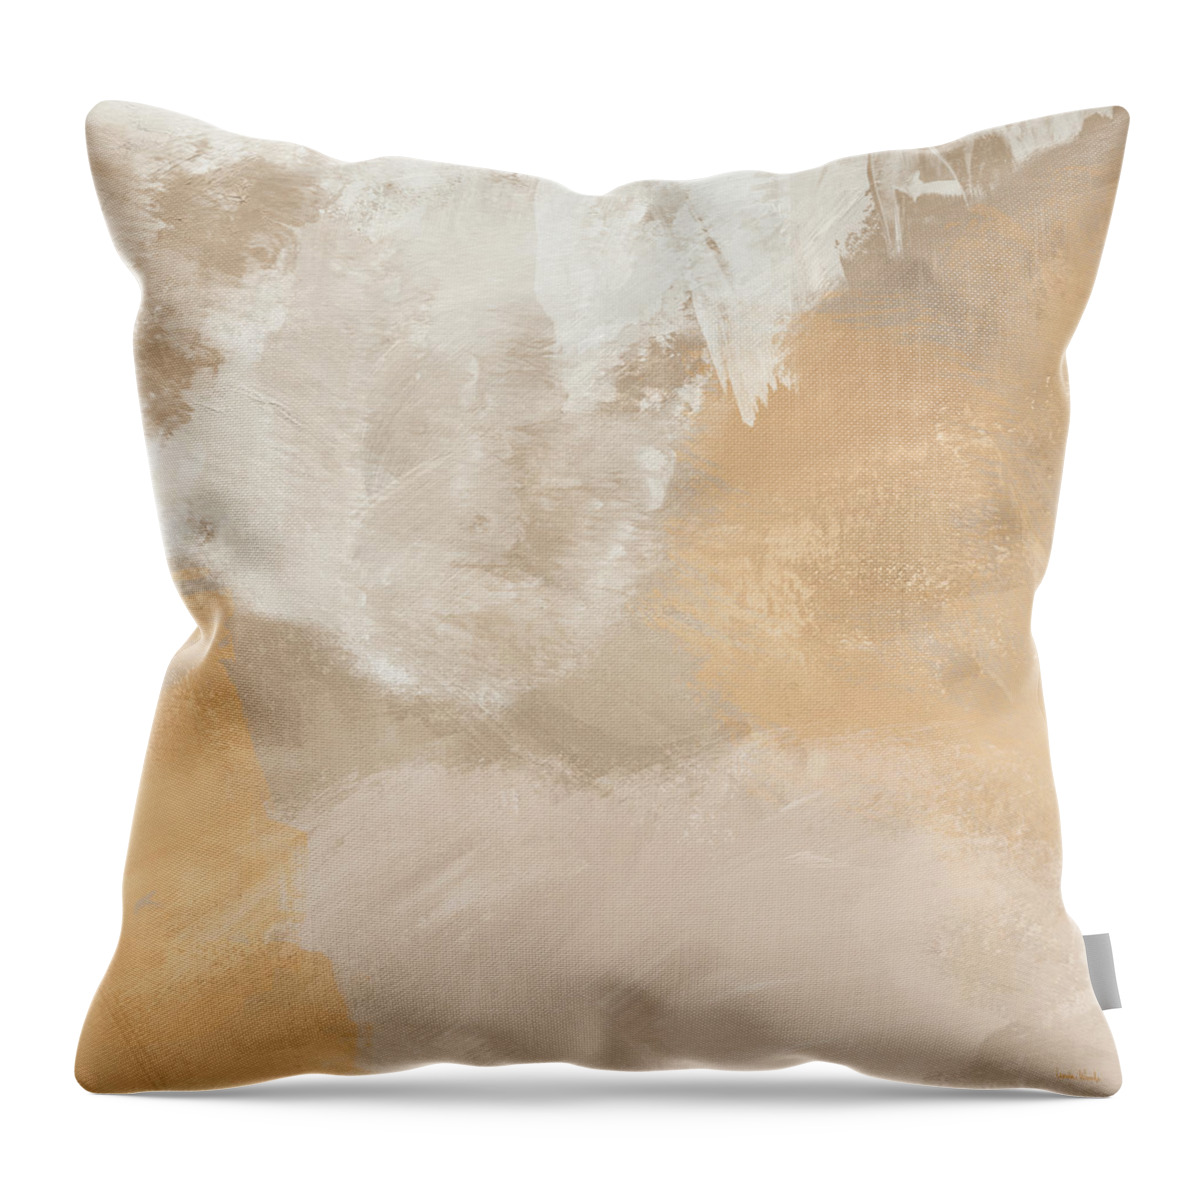 Neutral Throw Pillow featuring the painting Twilight Gold- Neutral Abstract Art by Linda Woods by Linda Woods